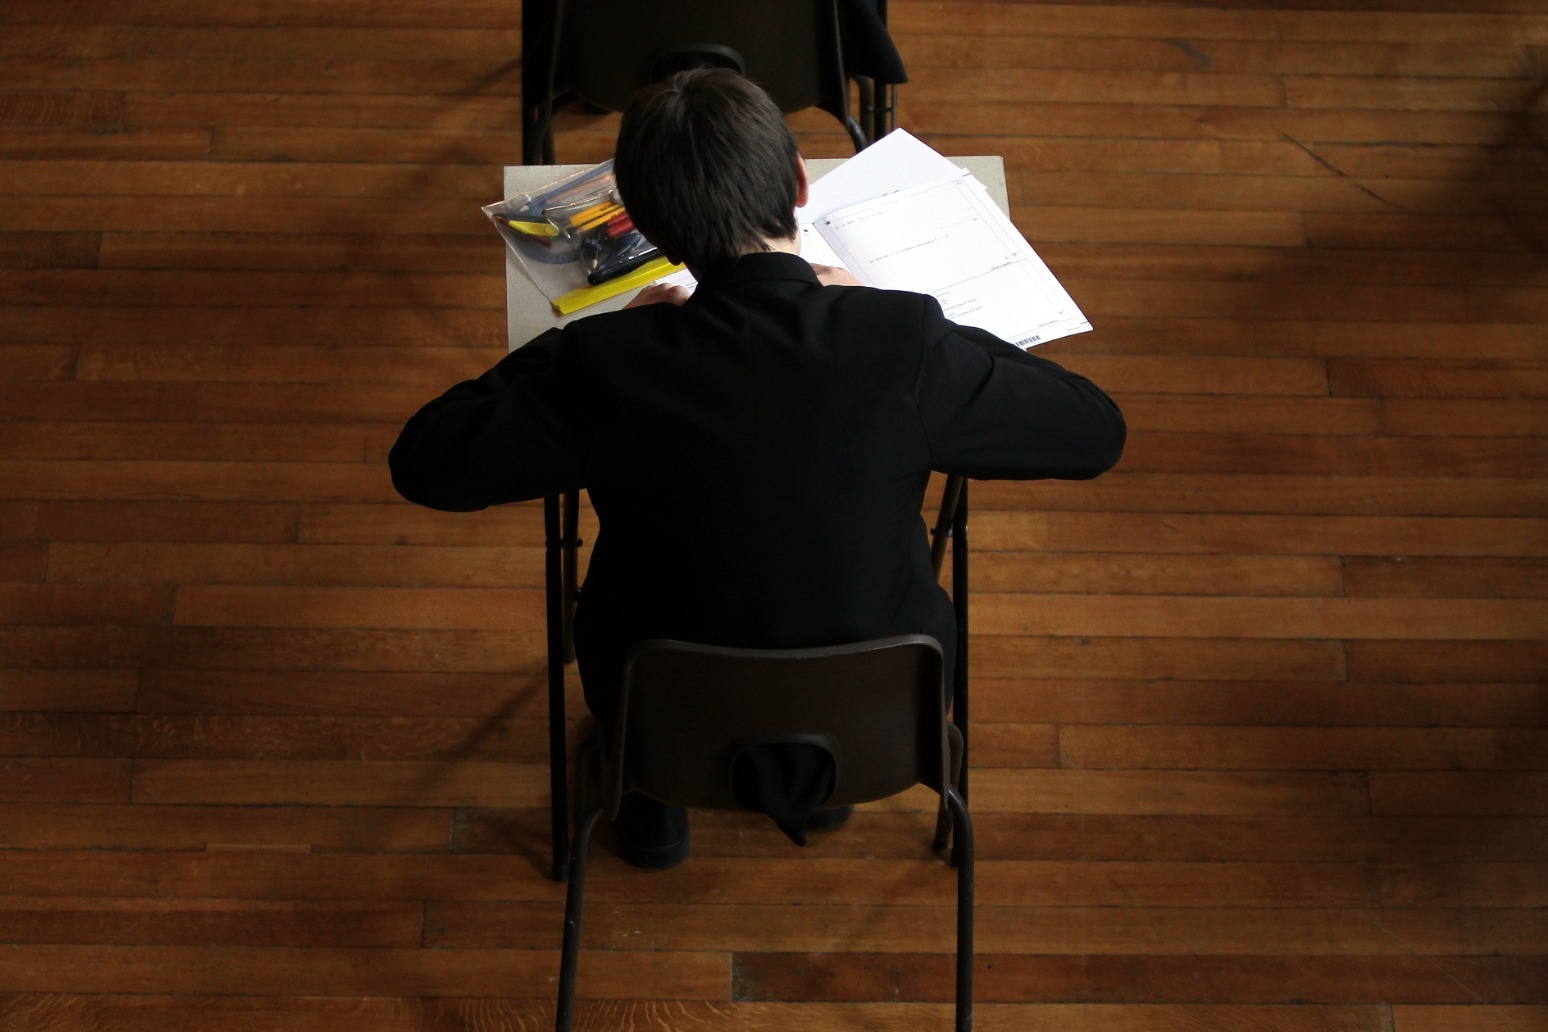 Delay next year’s exams because of Covid, says Labour 